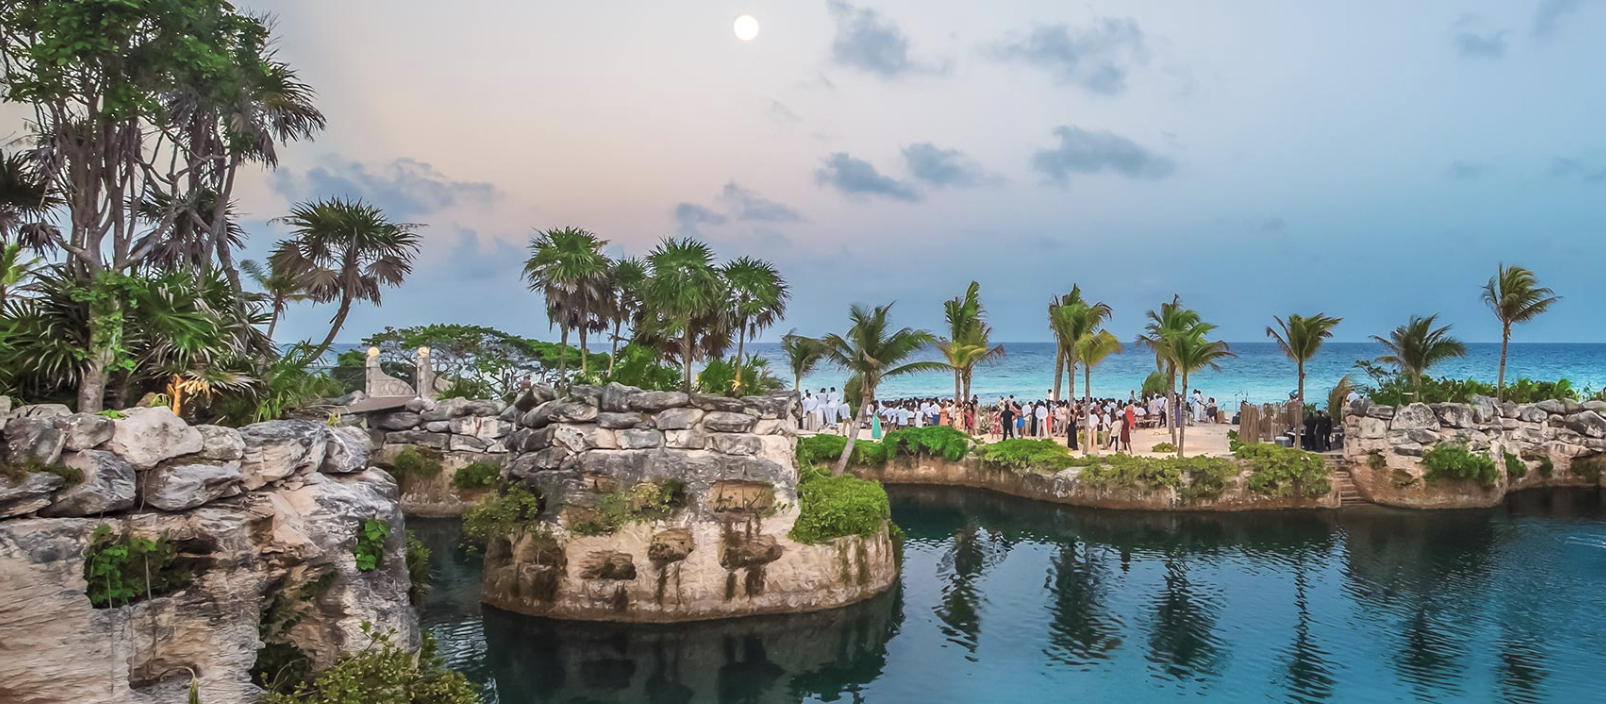 All about Grupo Xcaret: A Great Honeymoon Destination in Riviera Maya, Mexico from Linda Dancer of Honeymoons, Inc. 